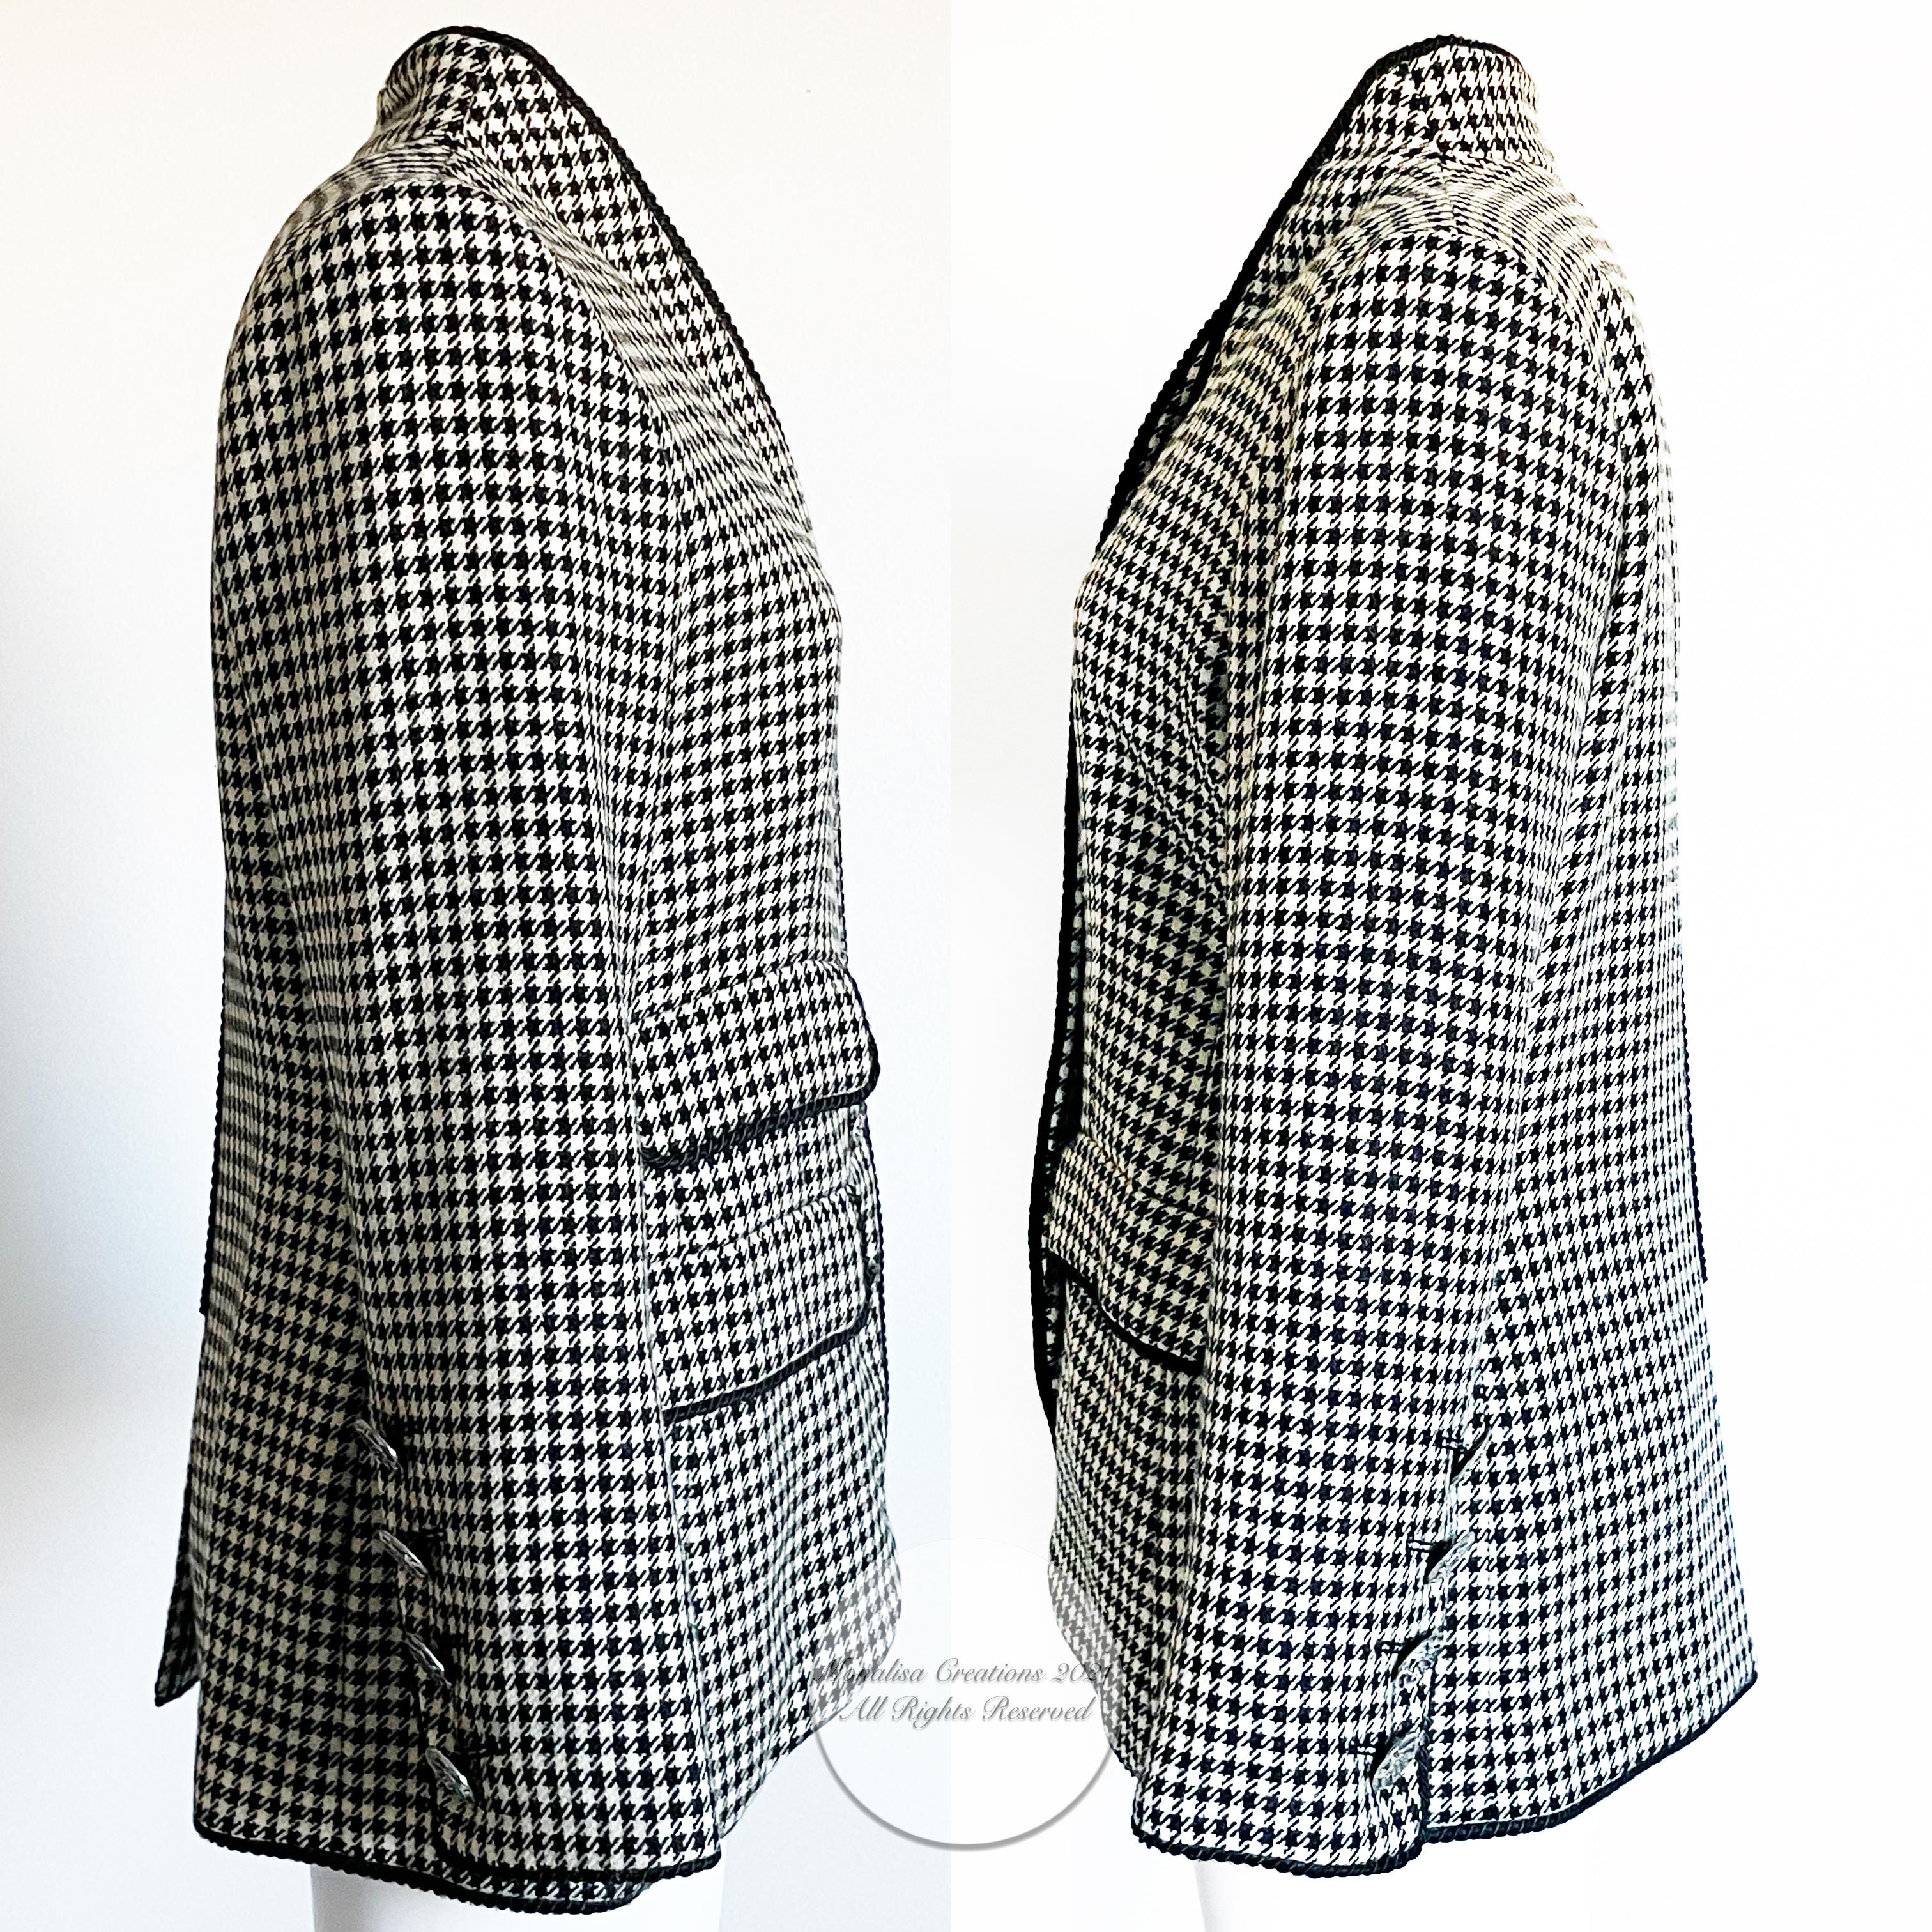 Yves Saint Laurent Jacket Houndstooth Wool Black Rope Trim Floral Buttons Sz 40 5